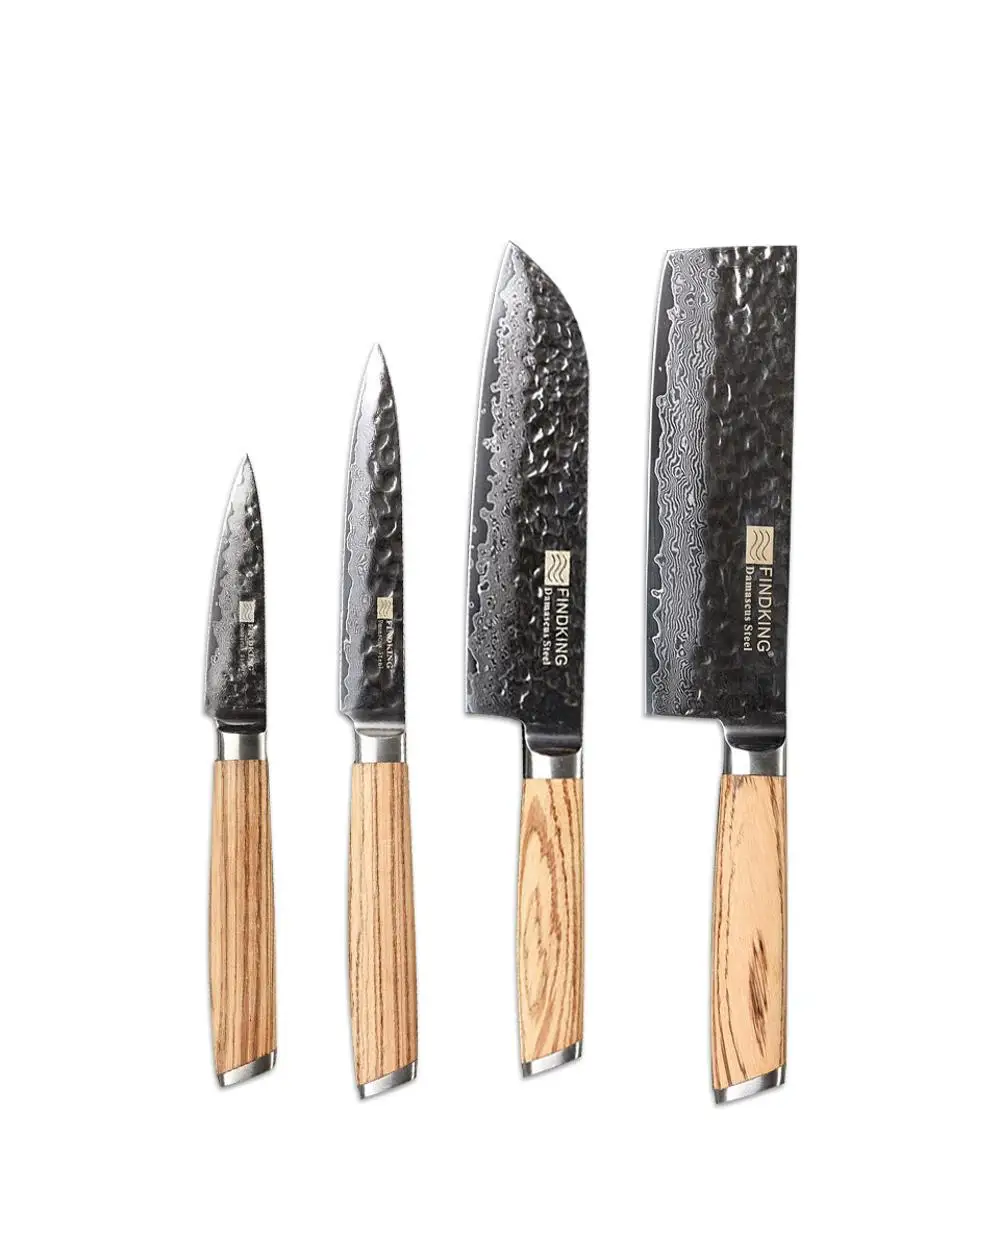 

FINDKING zebra wooden handle damascus knives set 4 pcs 6.5 inch chef 7 inch santoku 5inch utility 3inch fruit knife 67 layers